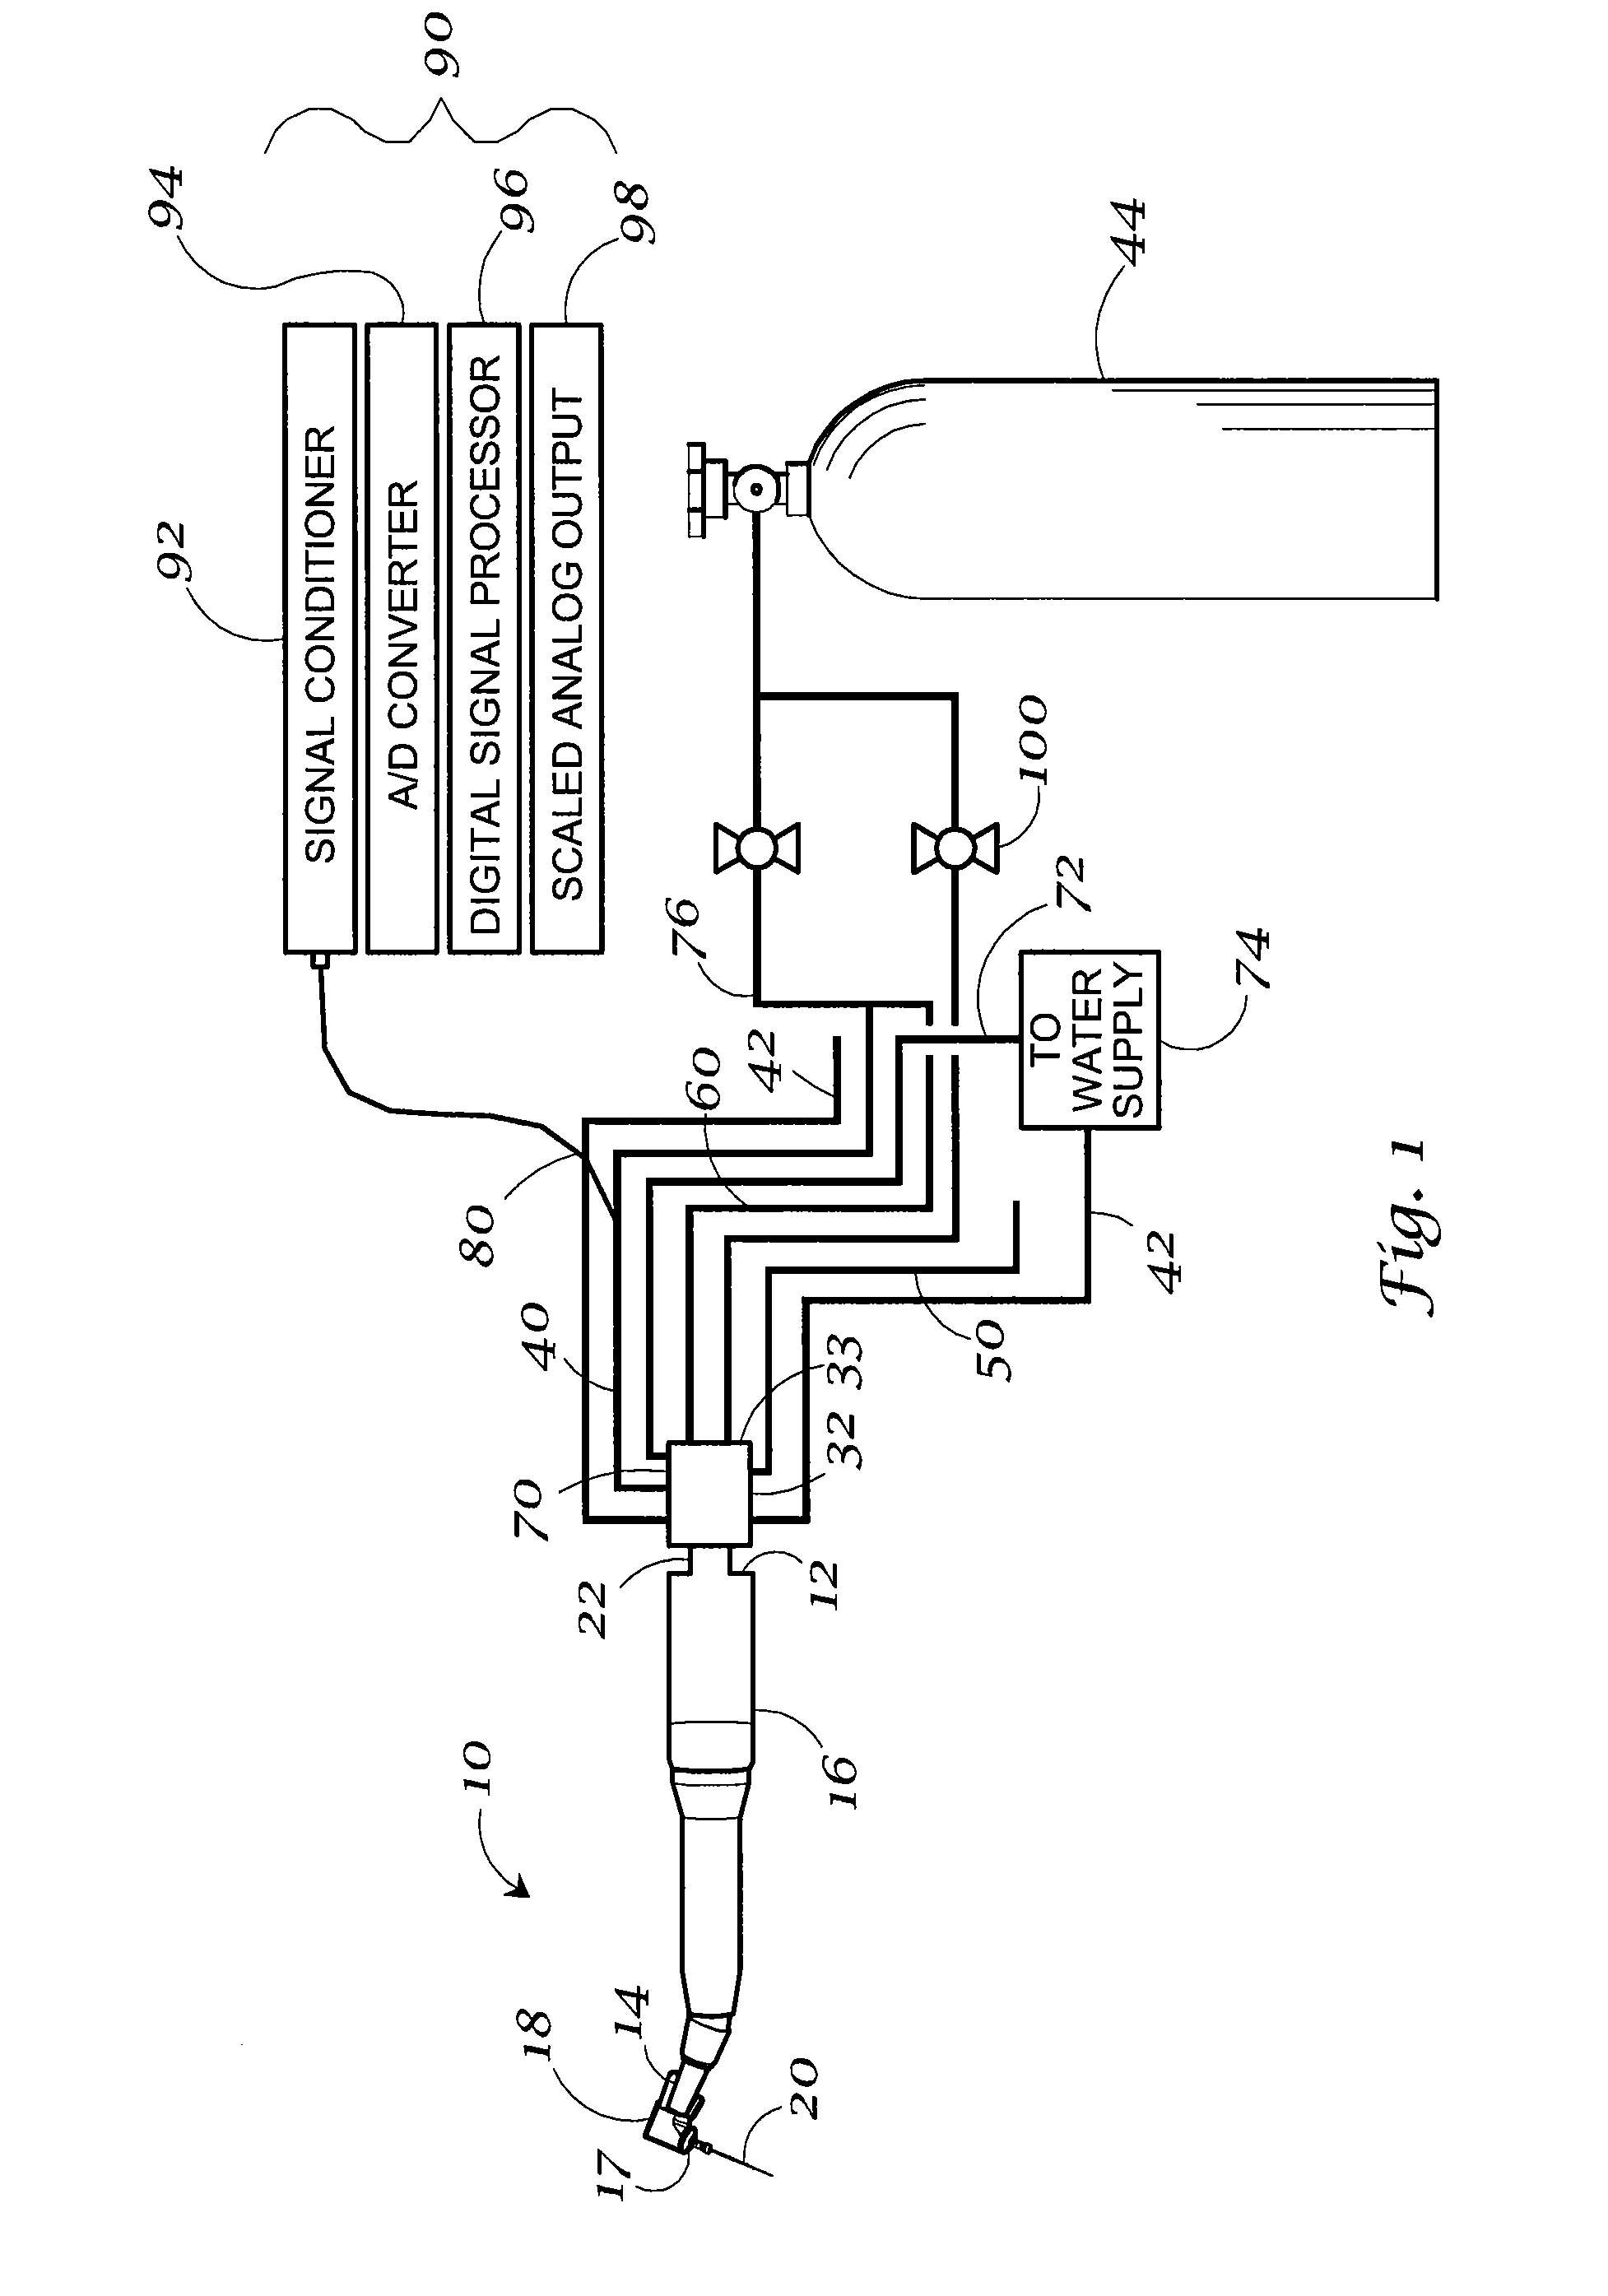 Closed loop speed control for a pneumatic dental handpiece